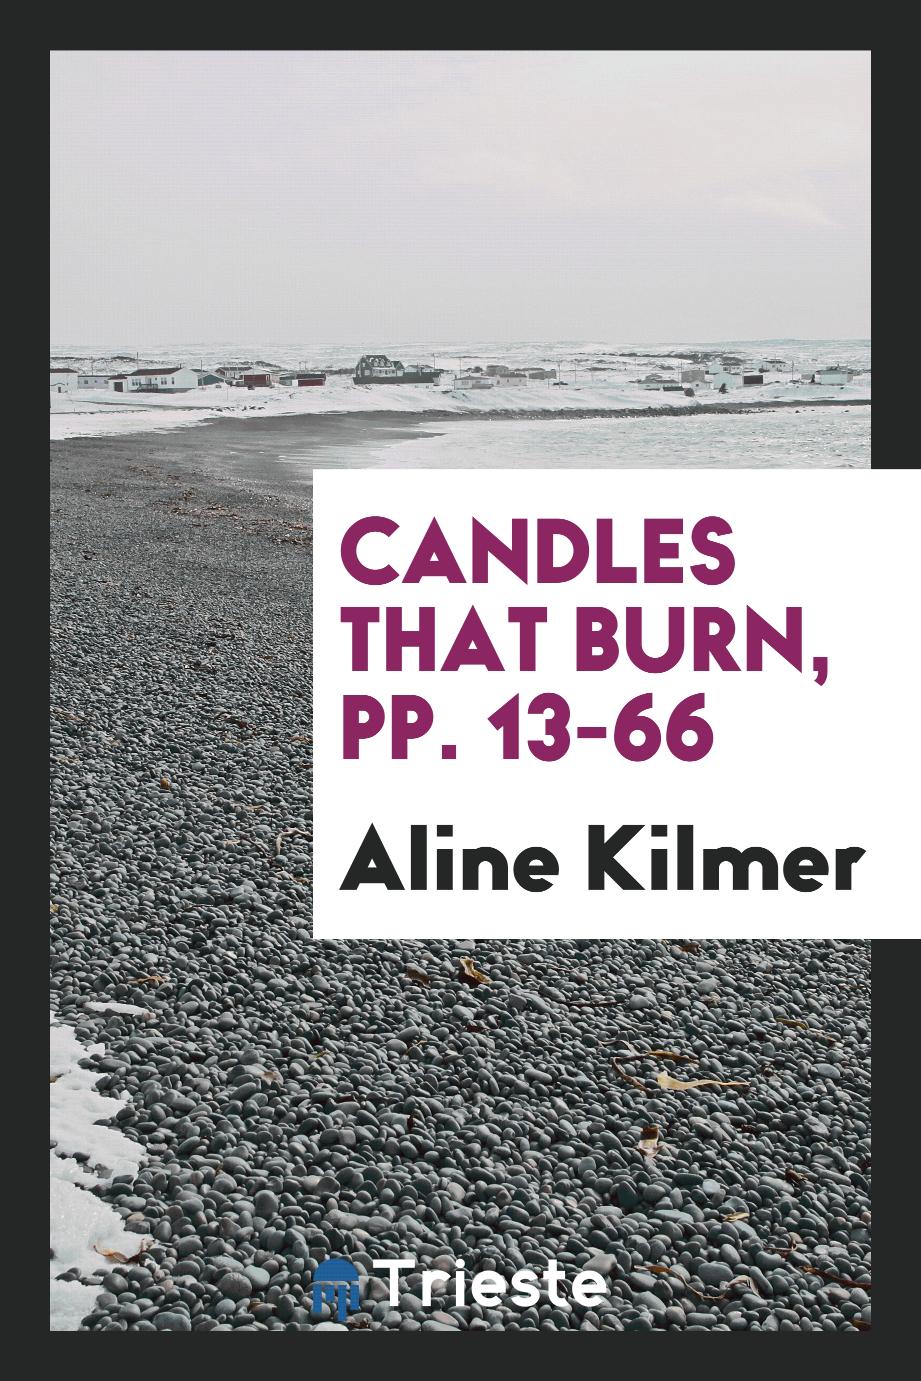 Candles that Burn, pp. 13-66